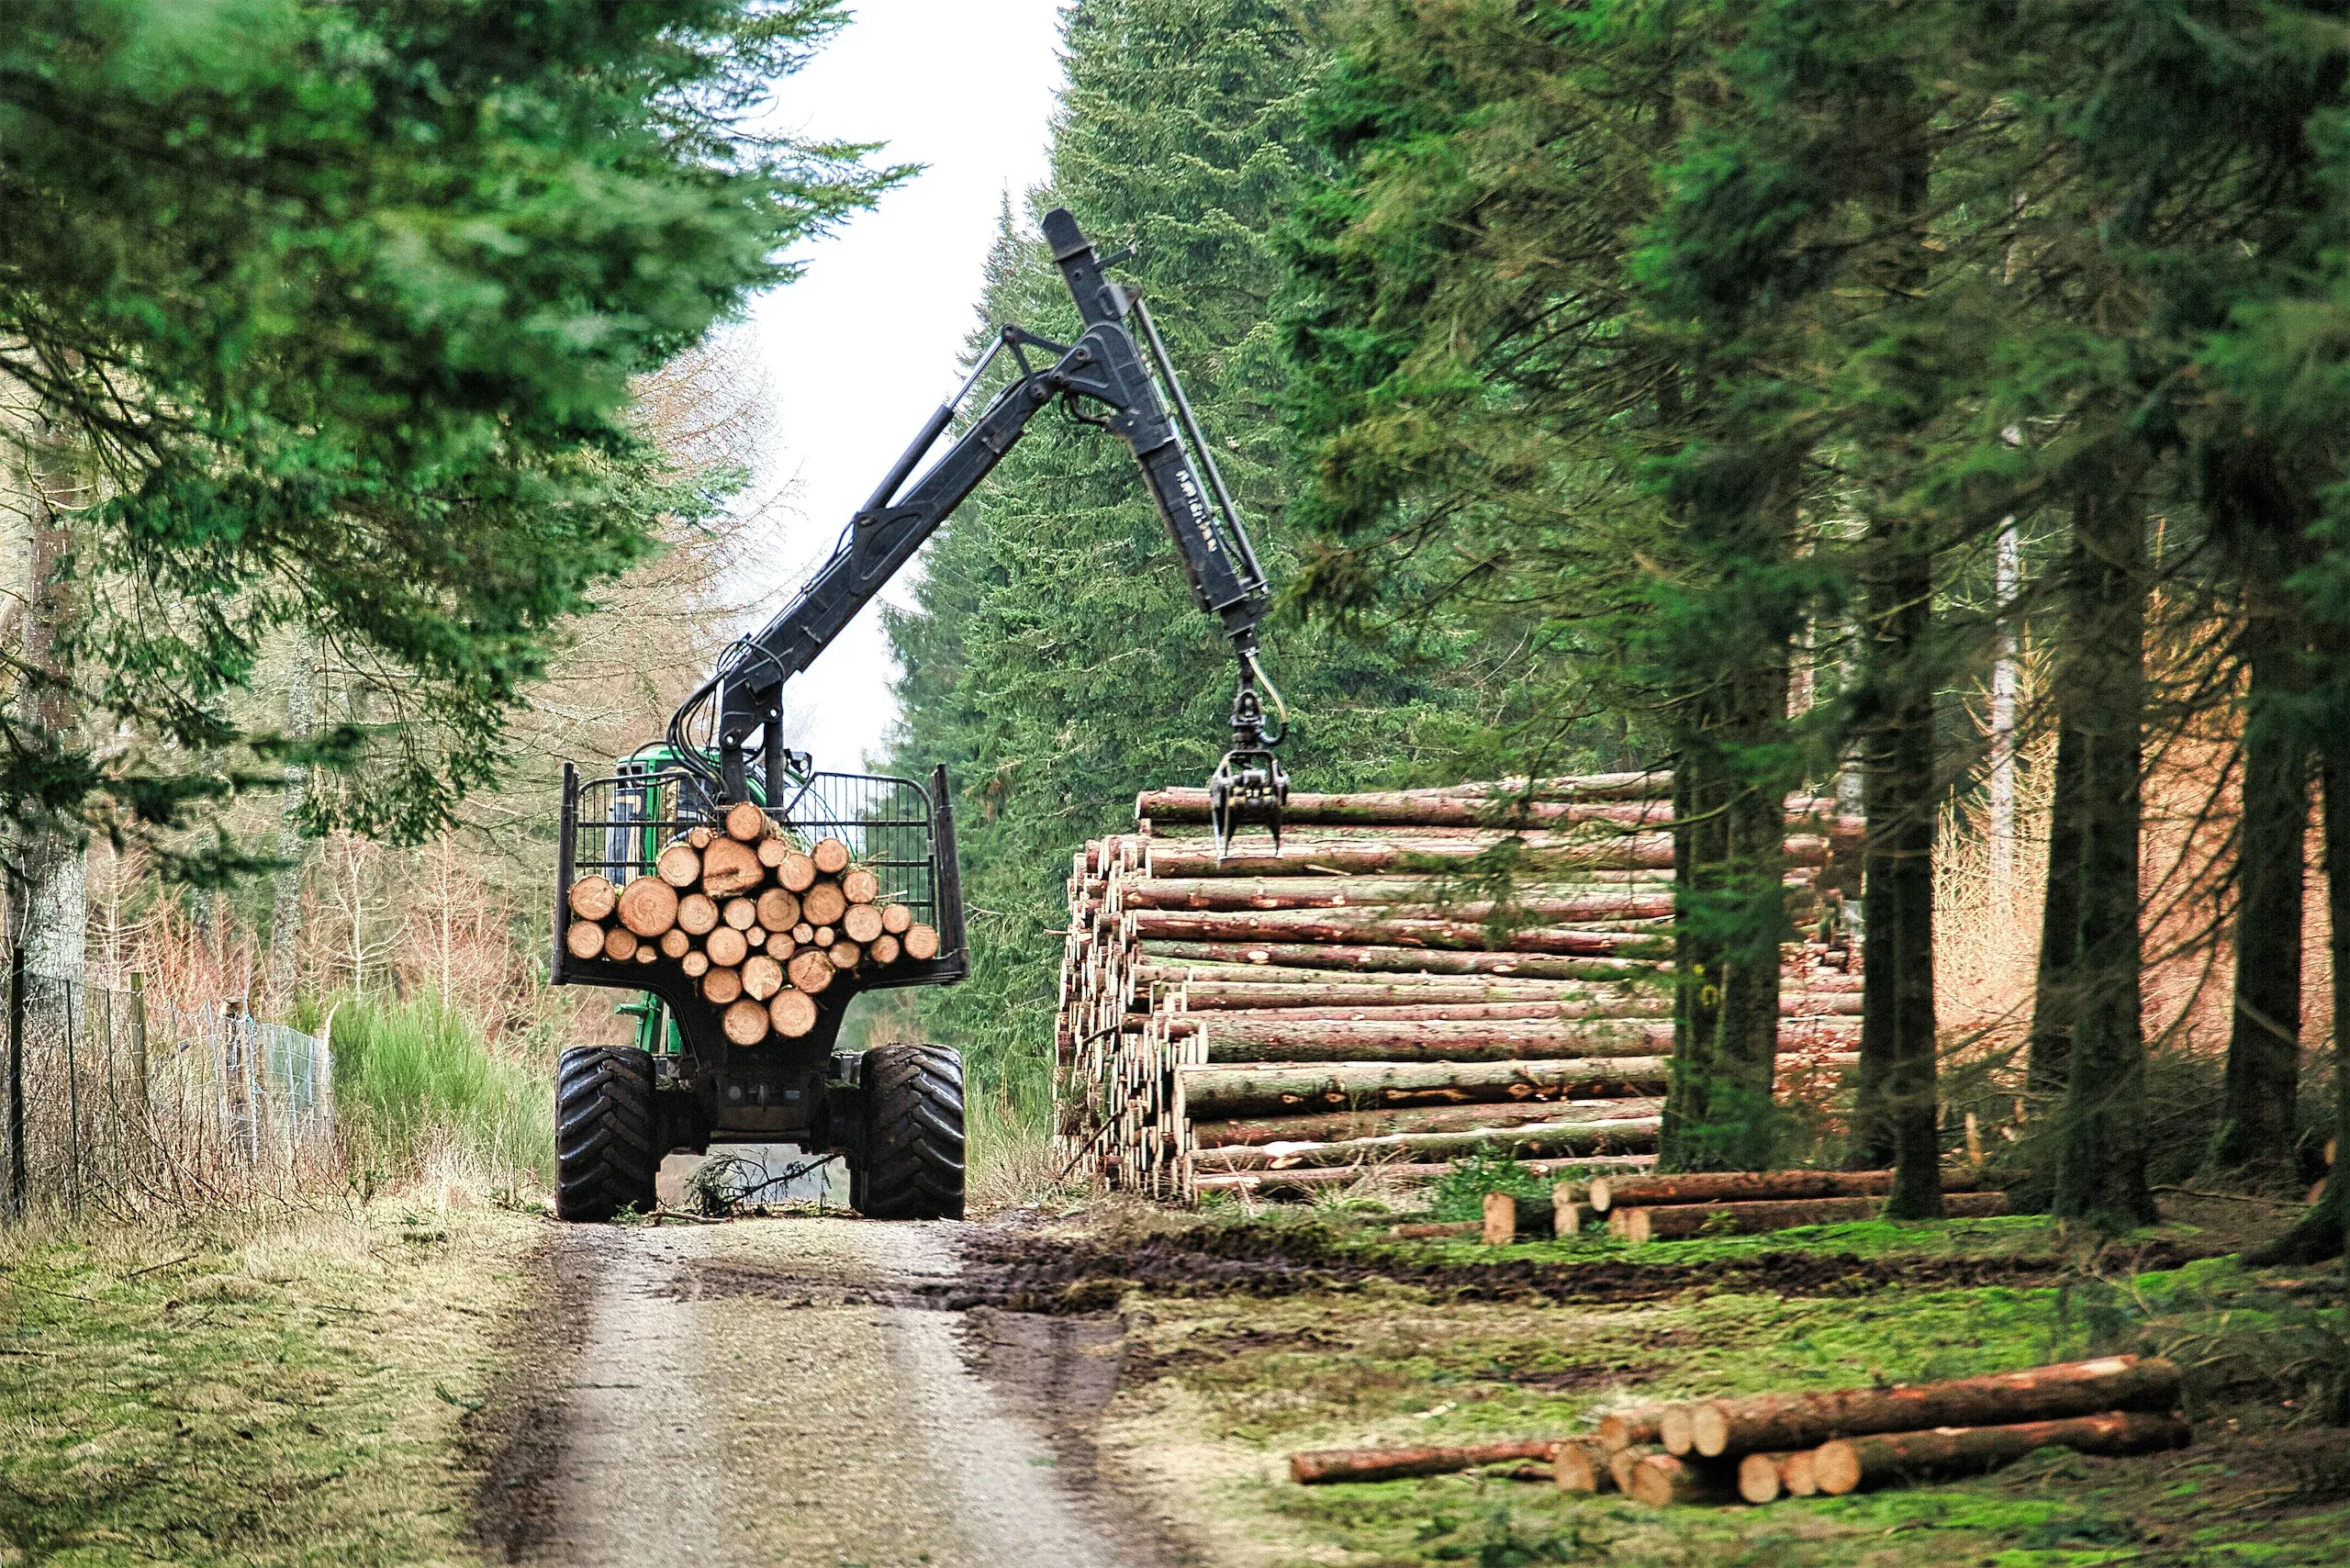 A log truck tree harvester collecting trees from a log pile in a forest